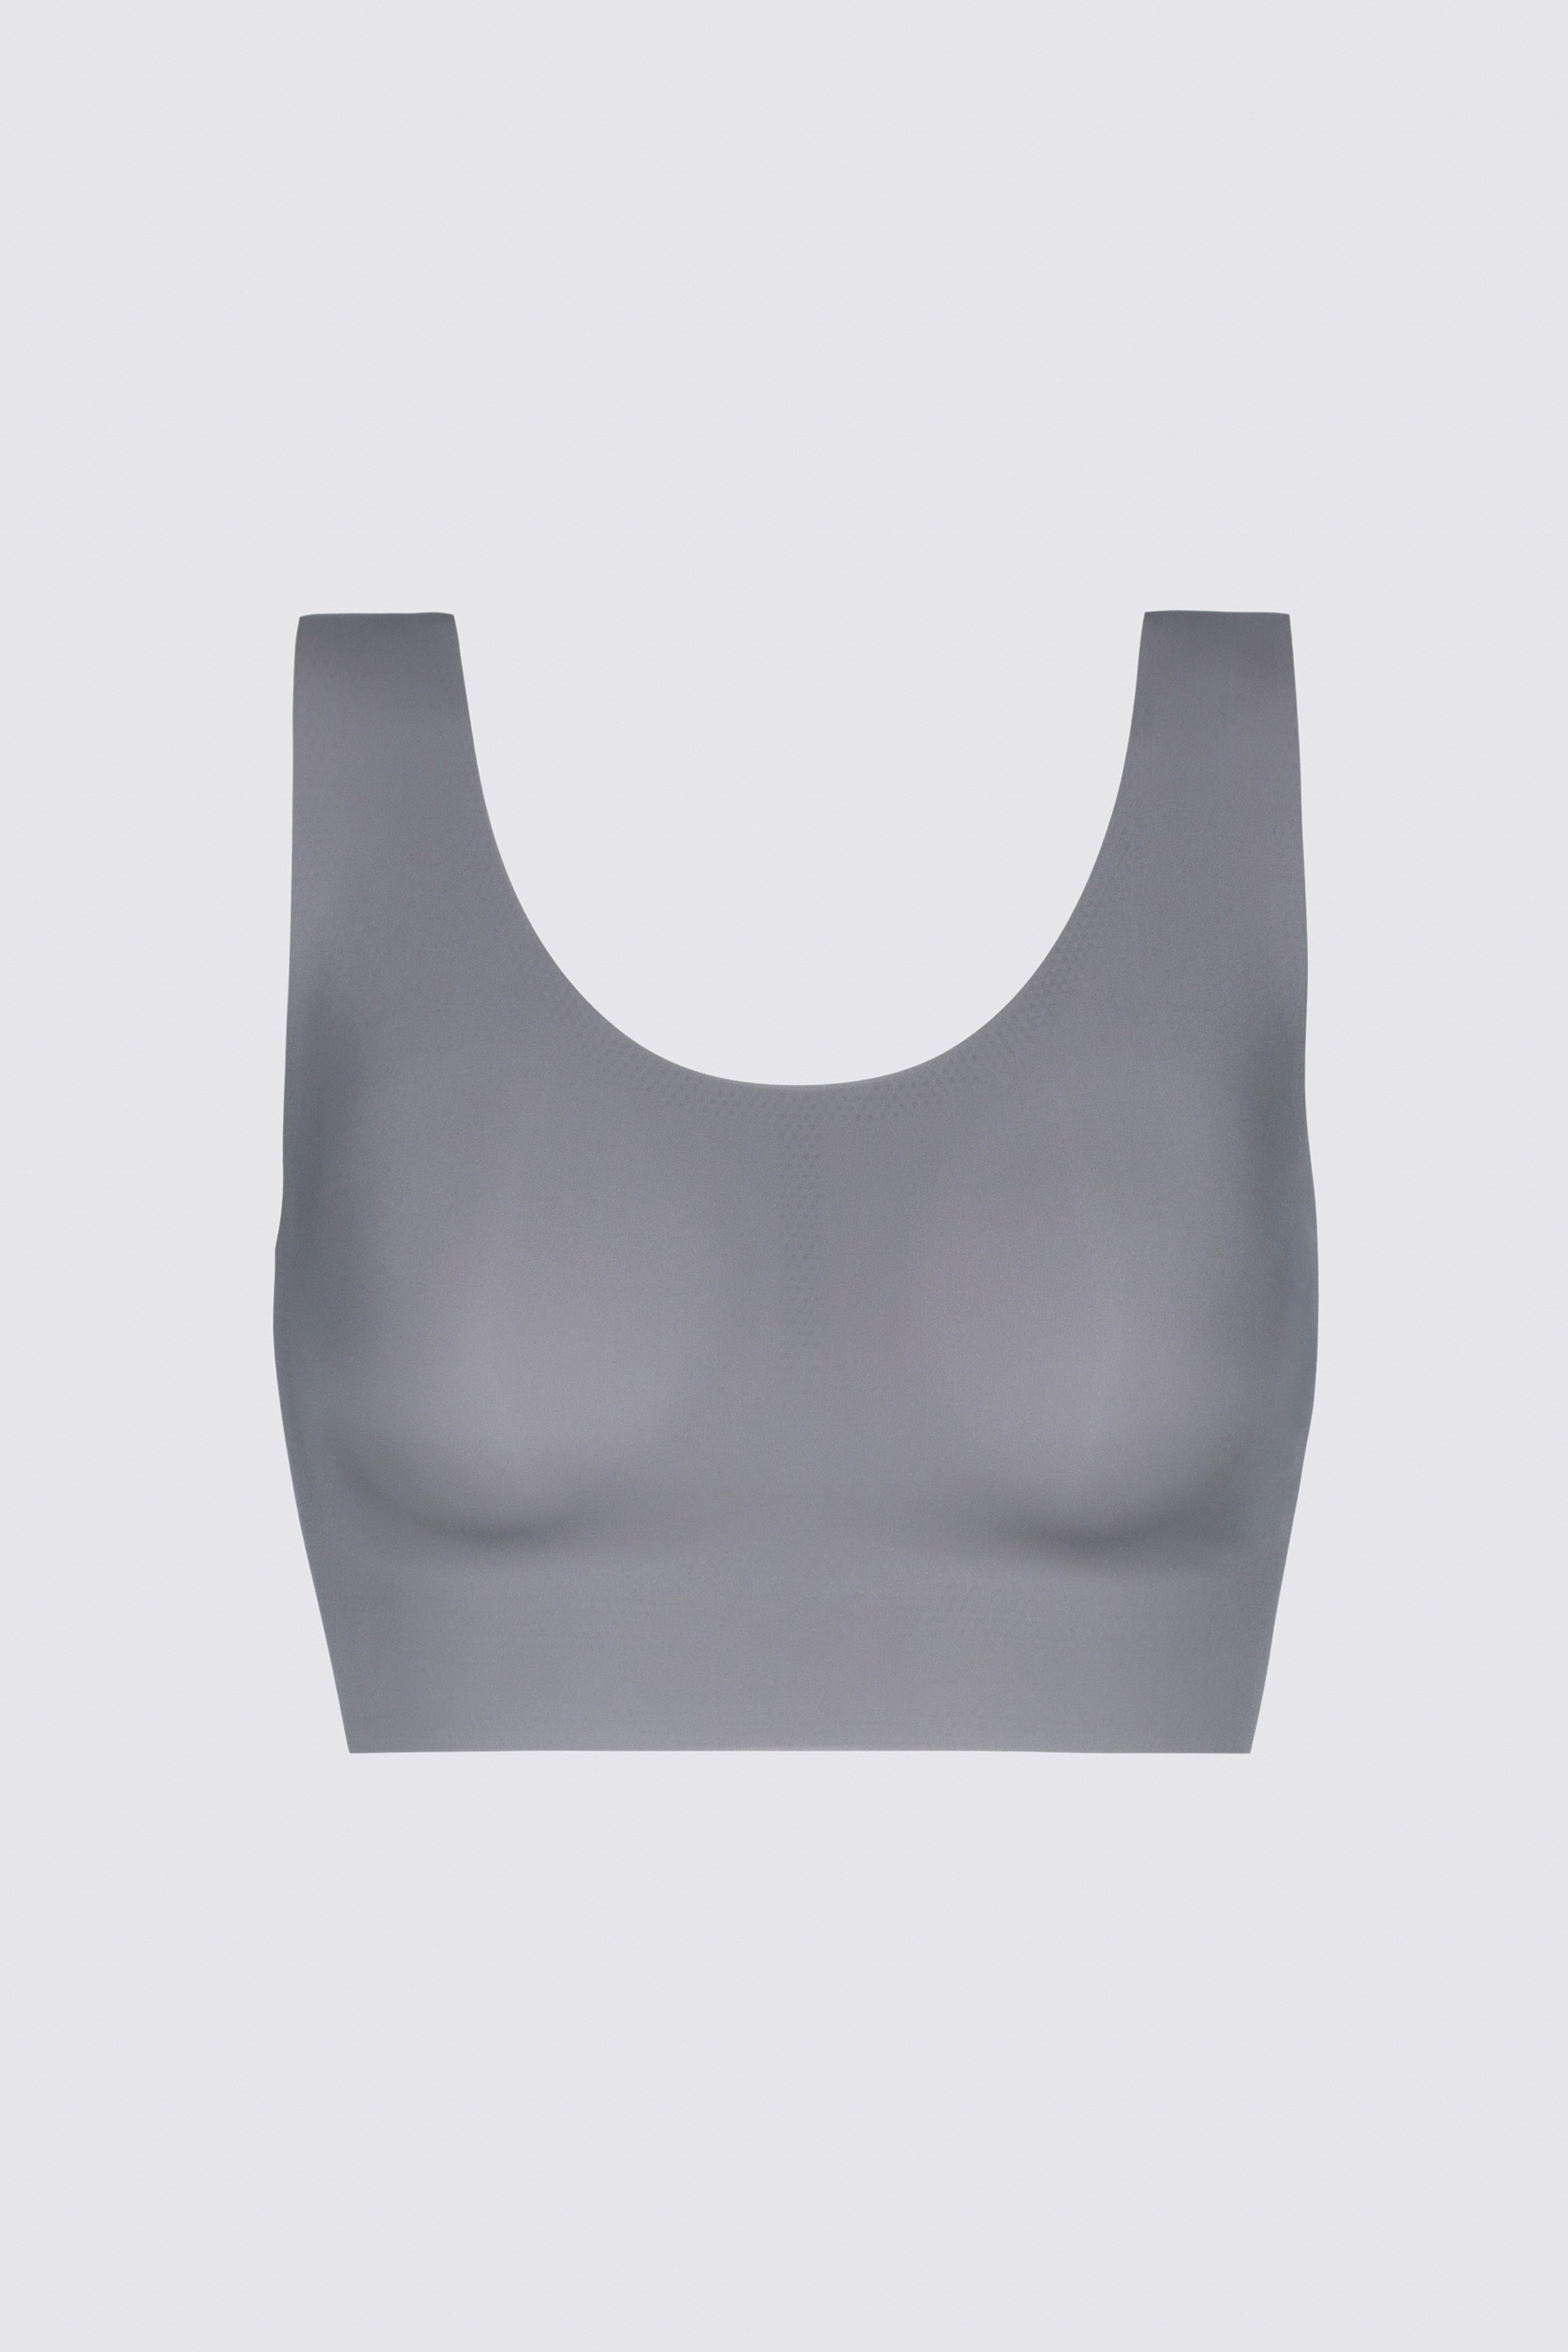 Bustier Lovely Grey Serie Pure Second me Uitknippen | mey®